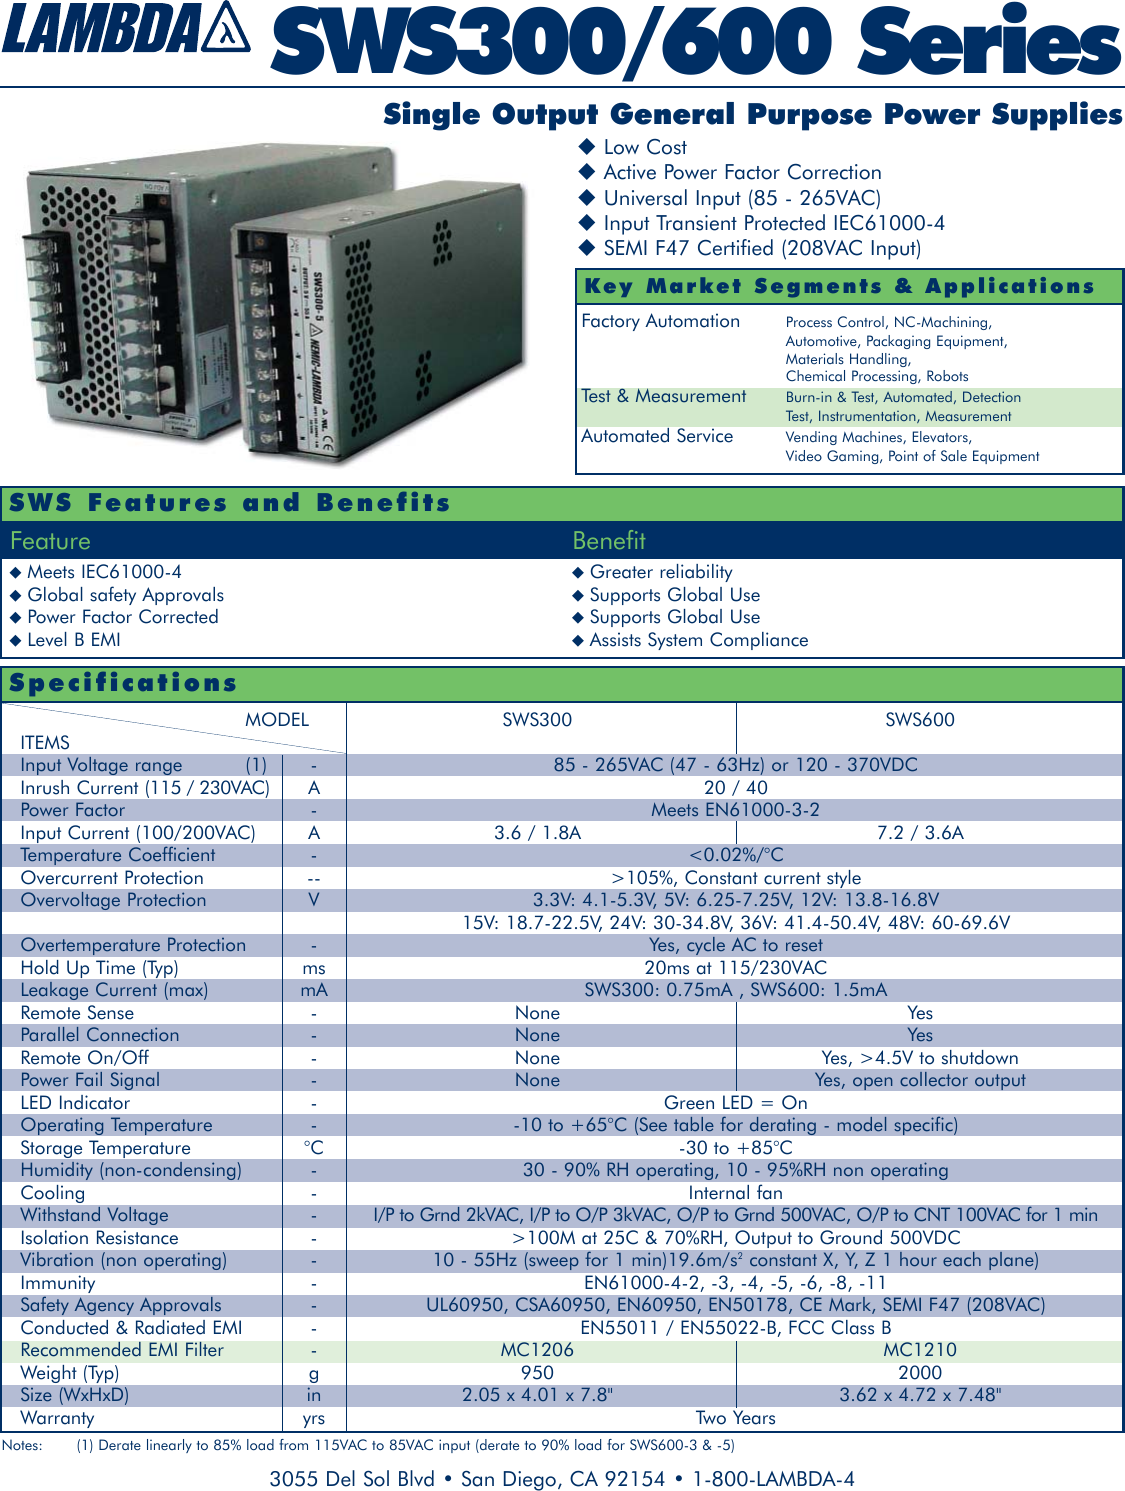 SWS300/600 Series3055 Del Sol Blvd • San Diego, CA 92154 • 1-800-LAMBDA-4Meets IEC61000-4 Greater reliabilityGlobal safety Approvals Supports Global UsePower Factor Corrected Supports Global UseLevel B EMI Assists System ComplianceFeature BenefitFactory Automation Process Control, NC-Machining,Automotive, Packaging Equipment, Materials Handling,Chemical Processing, RobotsTest &amp; Measurement Burn-in &amp; Test, Automated, DetectionTest, Instrumentation, MeasurementAutomated Service Vending Machines, Elevators, Video Gaming, Point of Sale EquipmentLow CostActive Power Factor CorrectionUniversal Input (85 - 265VAC)Input Transient Protected IEC61000-4SEMI F47 Certified (208VAC Input)Key Market Segments &amp; ApplicationsSWS Features and BenefitsSingle Output General Purpose Power SuppliesMODEL SWS300 SWS600ITEMSInput Voltage range  (1) - 85 - 265VAC (47 - 63Hz) or 120 - 370VDCInrush Current (115 / 230VAC) A 20 / 40Power Factor - Meets EN61000-3-2Input Current (100/200VAC) A 3.6 / 1.8A 7.2 / 3.6ATemperature Coefficient - &lt;0.02%/°COvercurrent Protection -- &gt;105%, Constant current styleOvervoltage Protection V 3.3V: 4.1-5.3V, 5V: 6.25-7.25V, 12V: 13.8-16.8V15V: 18.7-22.5V, 24V: 30-34.8V, 36V: 41.4-50.4V, 48V: 60-69.6VOvertemperature Protection - Yes, cycle AC to resetHold Up Time (Typ) ms 20ms at 115/230VACLeakage Current (max) mA SWS300: 0.75mA , SWS600: 1.5mARemote Sense - None YesParallel Connection - None YesRemote On/Off - None Yes, &gt;4.5V to shutdownPower Fail Signal - None Yes, open collector outputLED Indicator - Green LED = OnOperating Temperature - -10 to +65°C (See table for derating - model specific)Storage Temperature °C -30 to +85°CHumidity (non-condensing) - 30 - 90% RH operating, 10 - 95%RH non operatingCooling - Internal fanWithstand Voltage - I/P to Grnd 2kVAC, I/P to O/P 3kVAC, O/P to Grnd 500VAC, O/P to CNT 100VAC for 1 minIsolation Resistance - &gt;100M at 25C &amp; 70%RH, Output to Ground 500VDCVibration (non operating) - 10 - 55Hz (sweep for 1 min)19.6m/s2constant X, Y, Z 1 hour each plane)Immunity - EN61000-4-2, -3, -4, -5, -6, -8, -11Safety Agency Approvals - UL60950, CSA60950, EN60950, EN50178, CE Mark, SEMI F47 (208VAC)Conducted &amp; Radiated EMI - EN55011 / EN55022-B, FCC Class BRecommended EMI Filter - MC1206 MC1210Weight (Typ) g 950 2000Size (WxHxD) in 2.05 x 4.01 x 7.8&quot; 3.62 x 4.72 x 7.48&quot;Warranty yrs Two YearsSpecificationsNotes: (1) Derate linearly to 85% load from 115VAC to 85VAC input (derate to 90% load for SWS600-3 &amp; -5)